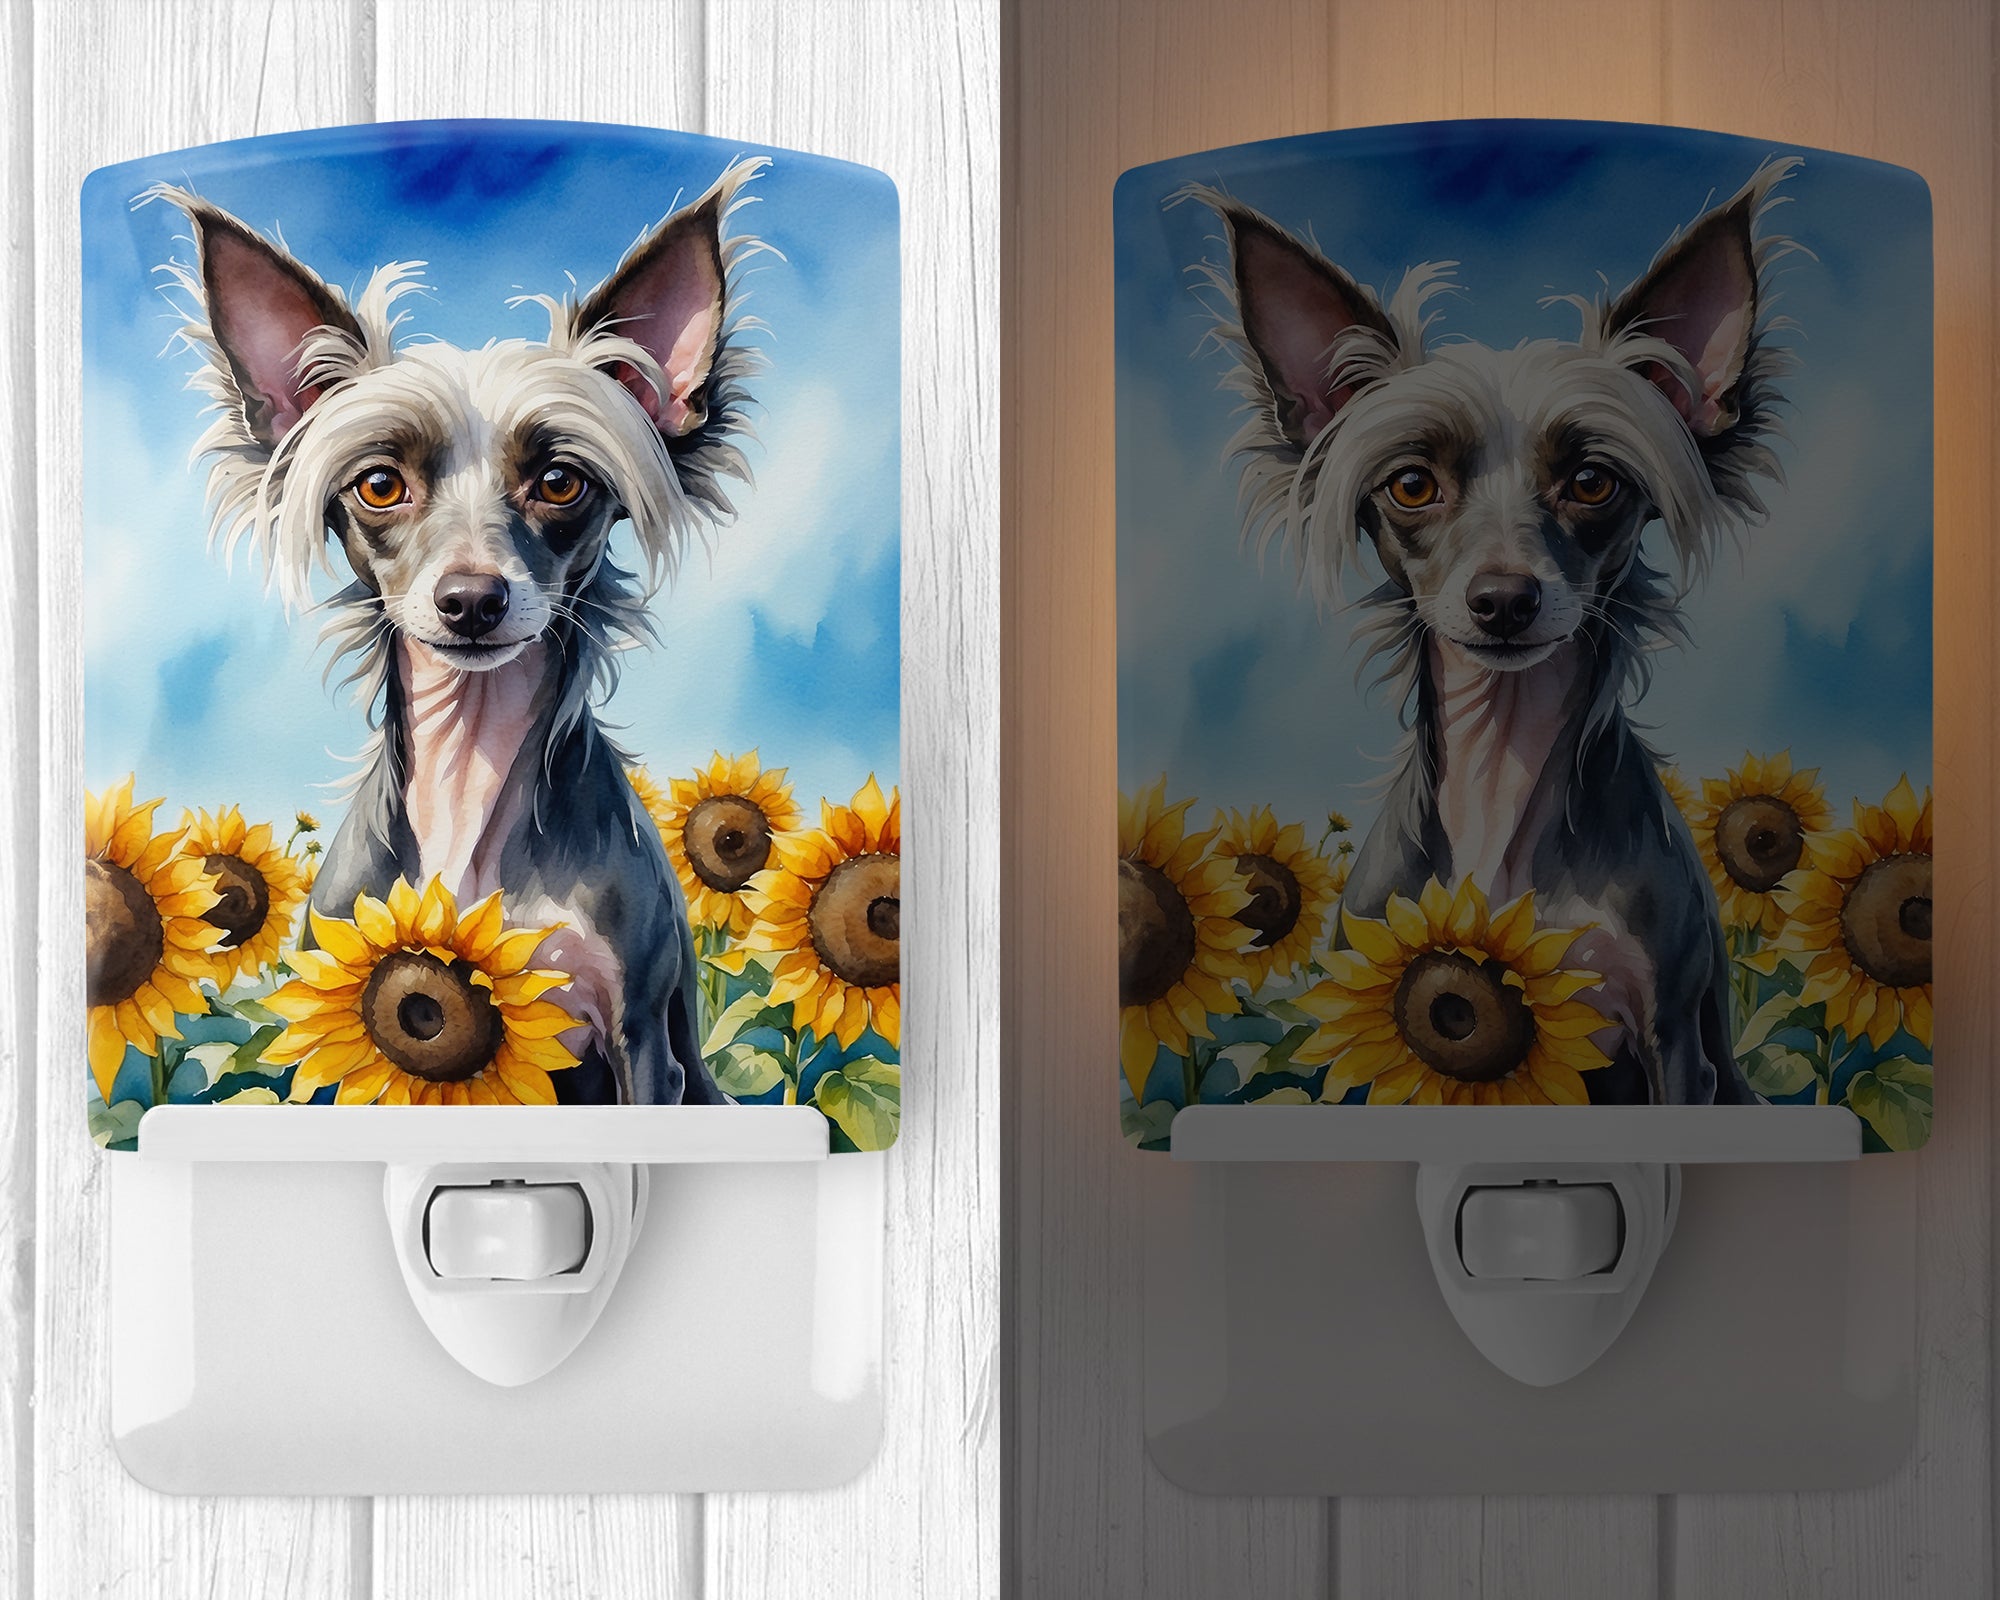 Buy this Chinese Crested in Sunflowers Ceramic Night Light